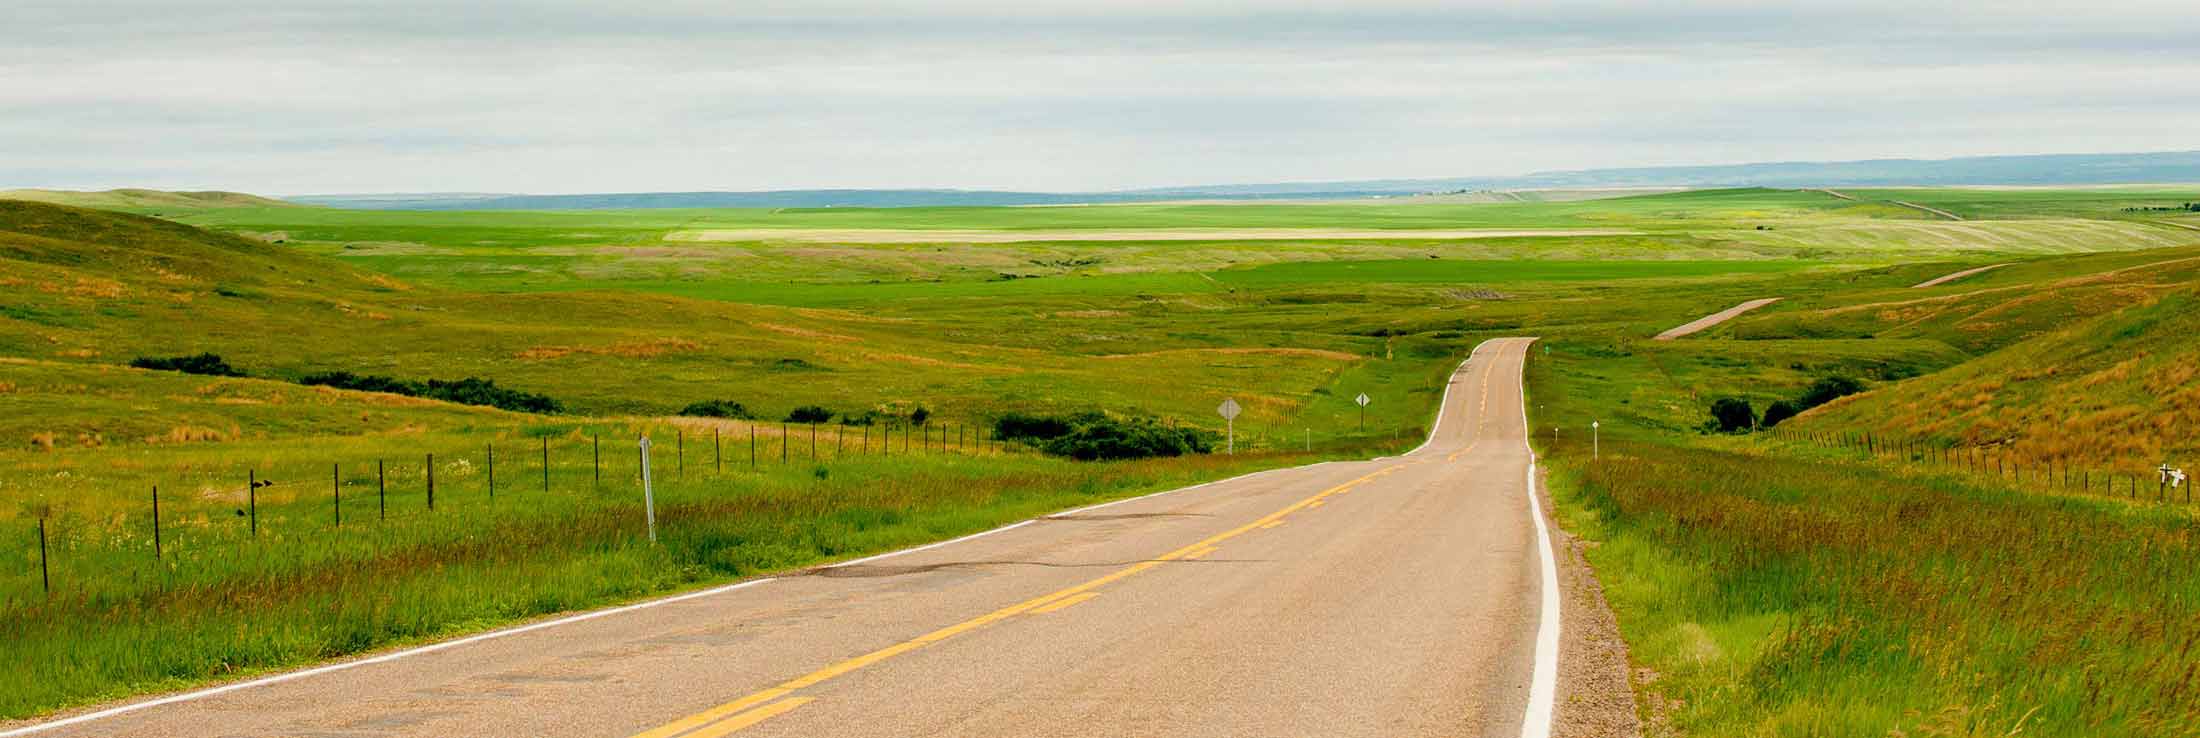 Virtual Road Trip in Montana's Missouri River Country